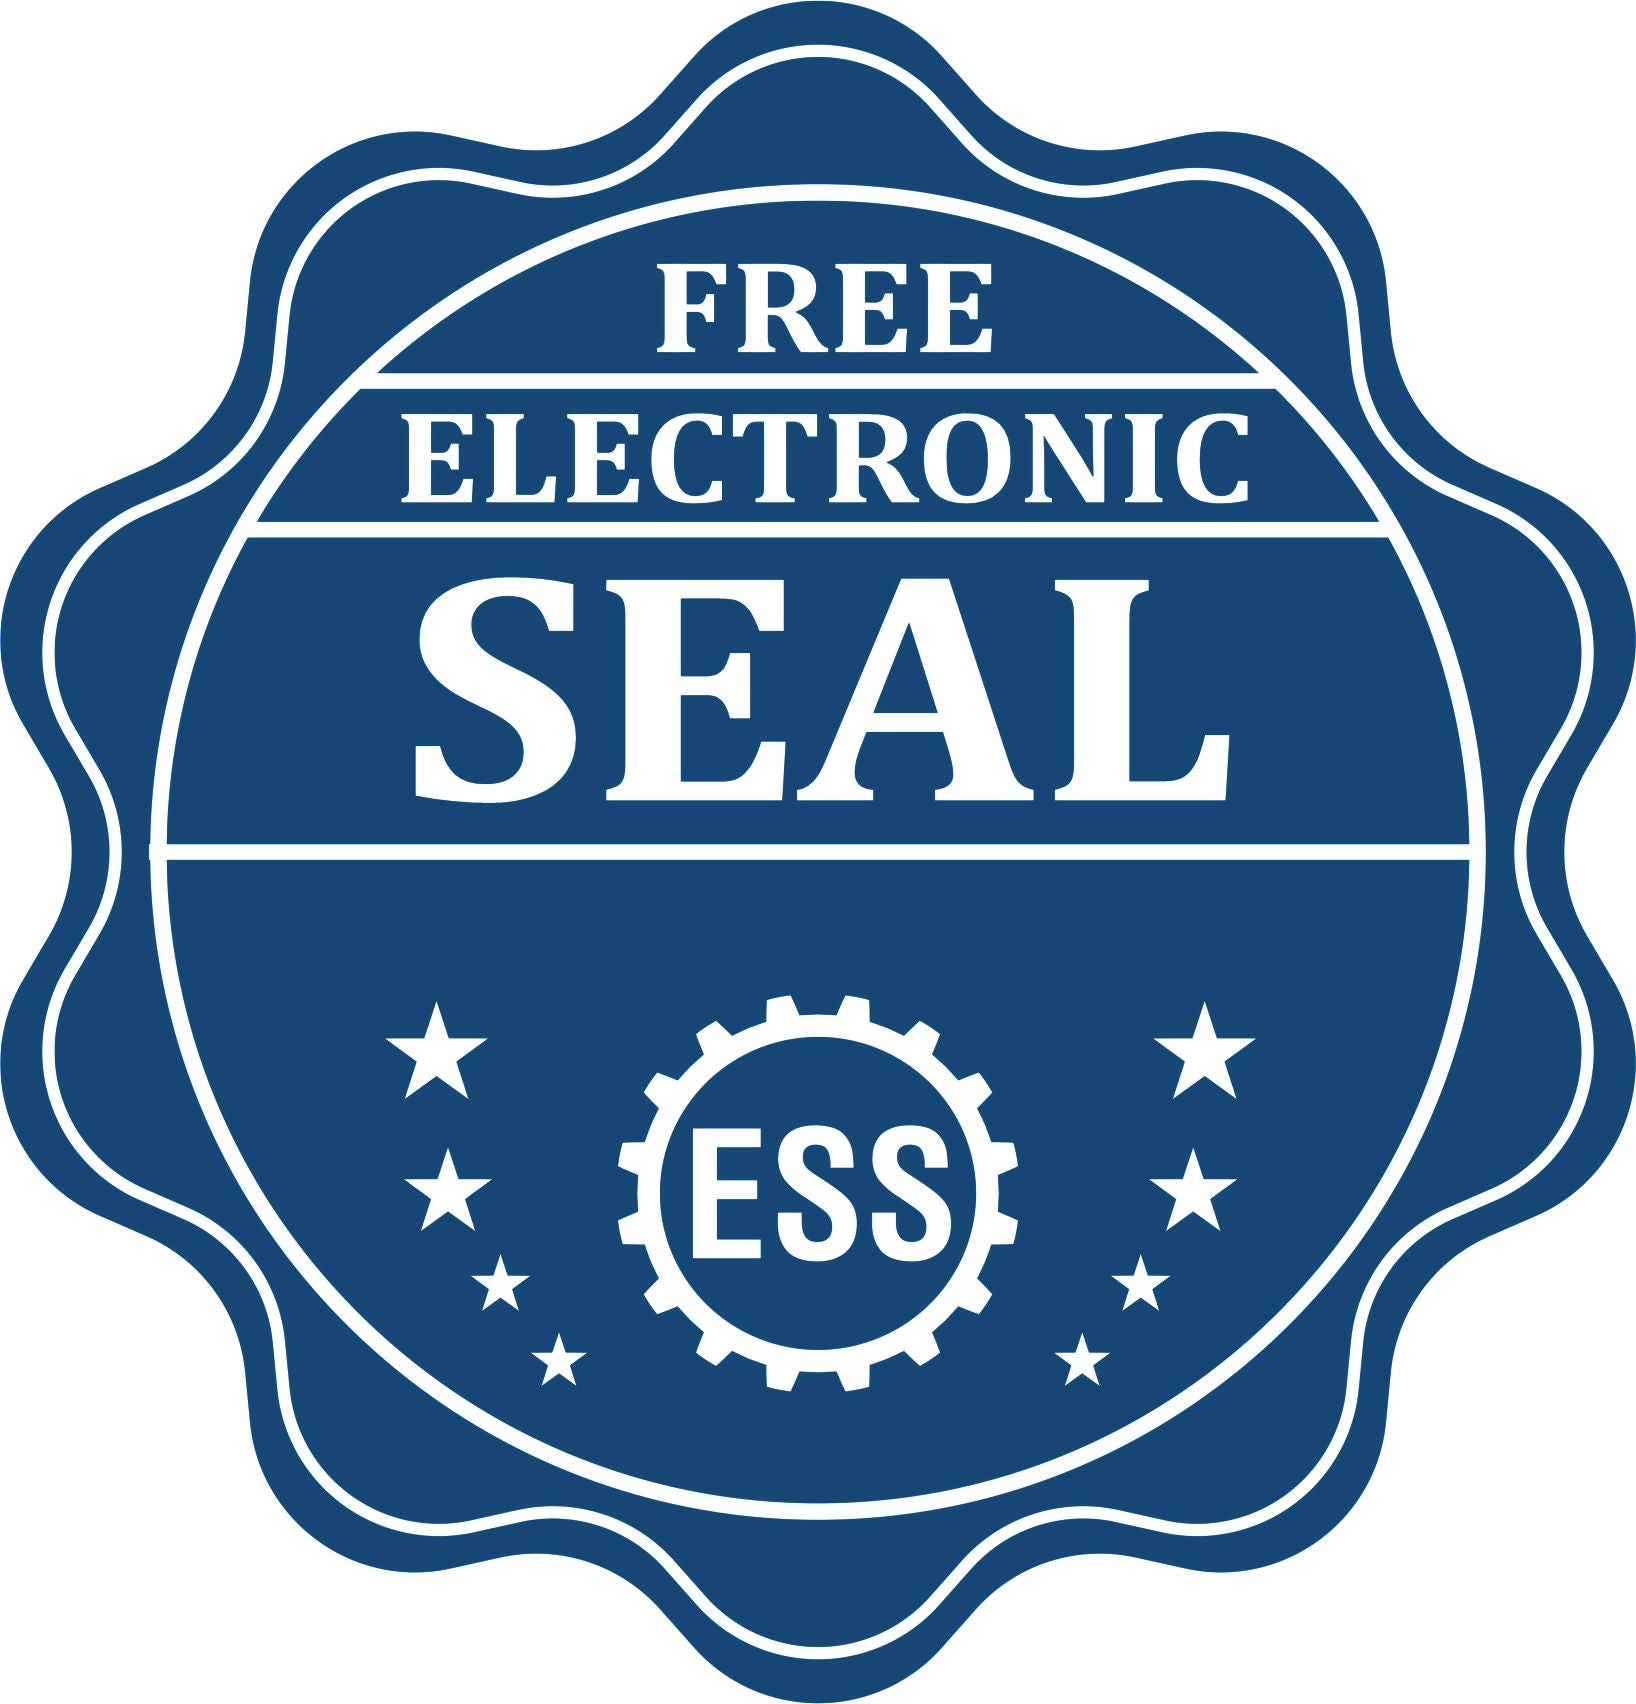 A badge showing a free electronic seal for the Heavy Duty Cast Iron North Dakota Land Surveyor Seal Embosser with stars and the ESS gear on the emblem.